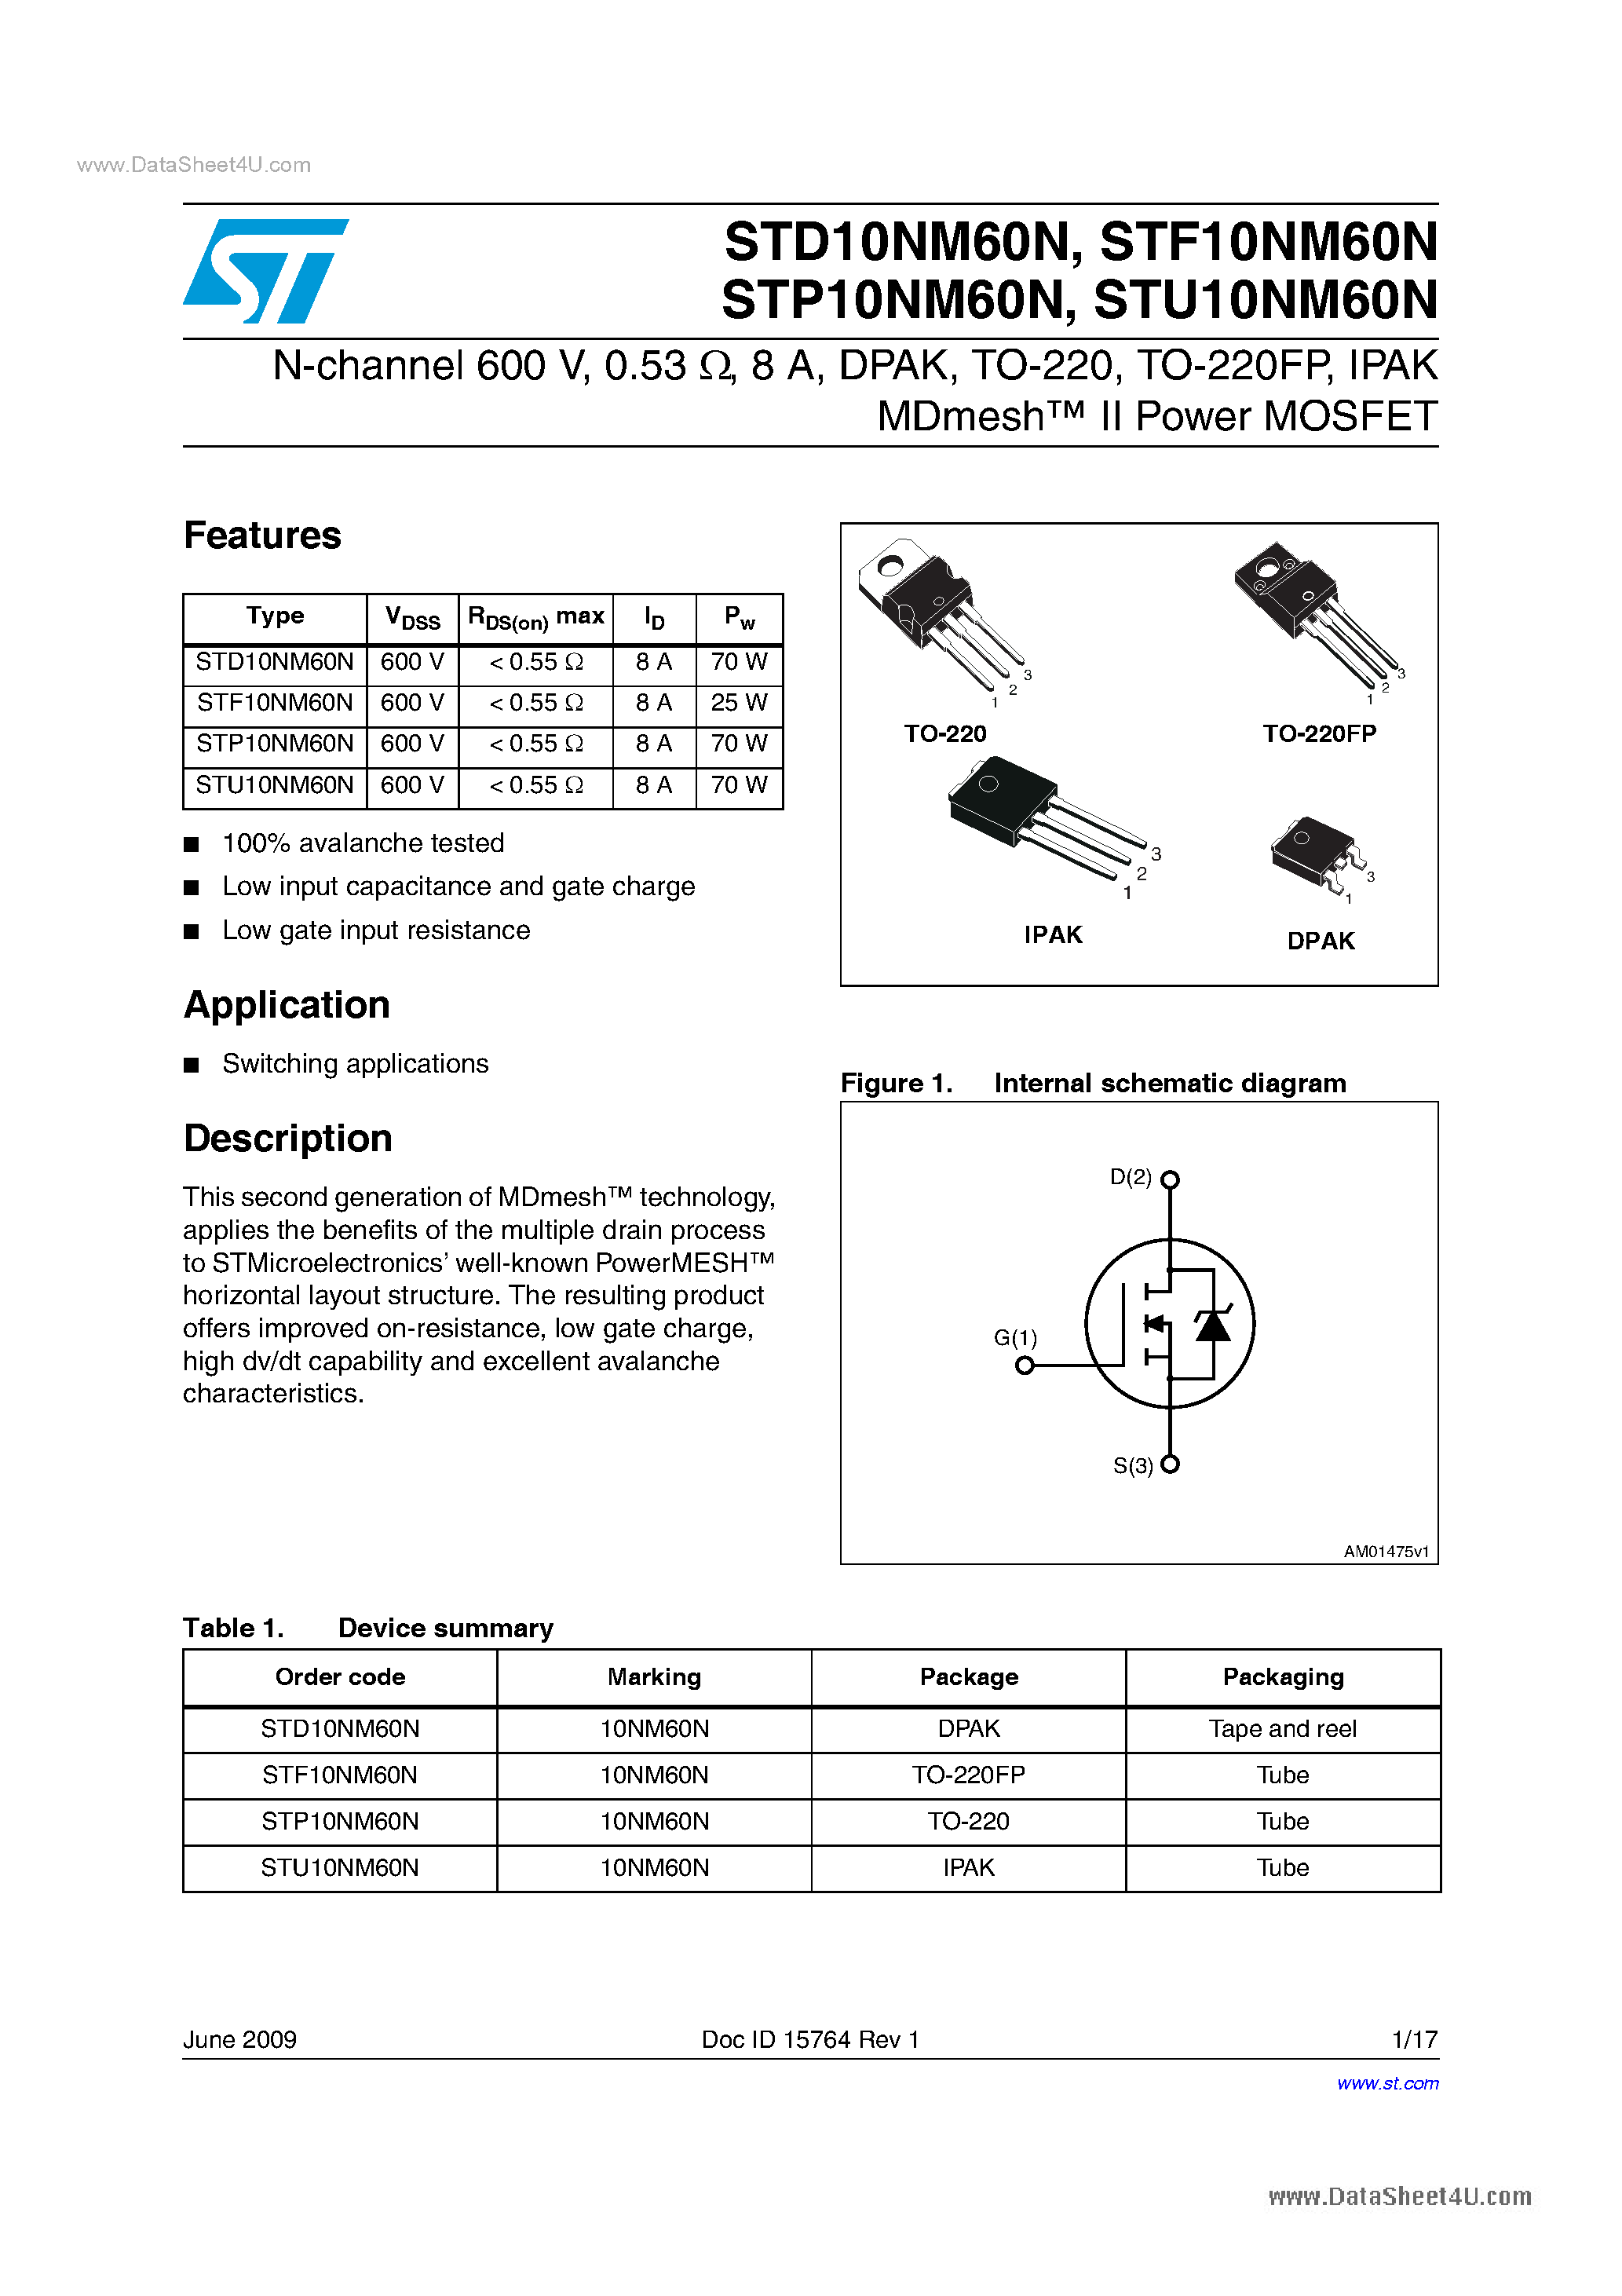 Datasheet STP10NM60N - Power MOSFETs page 1